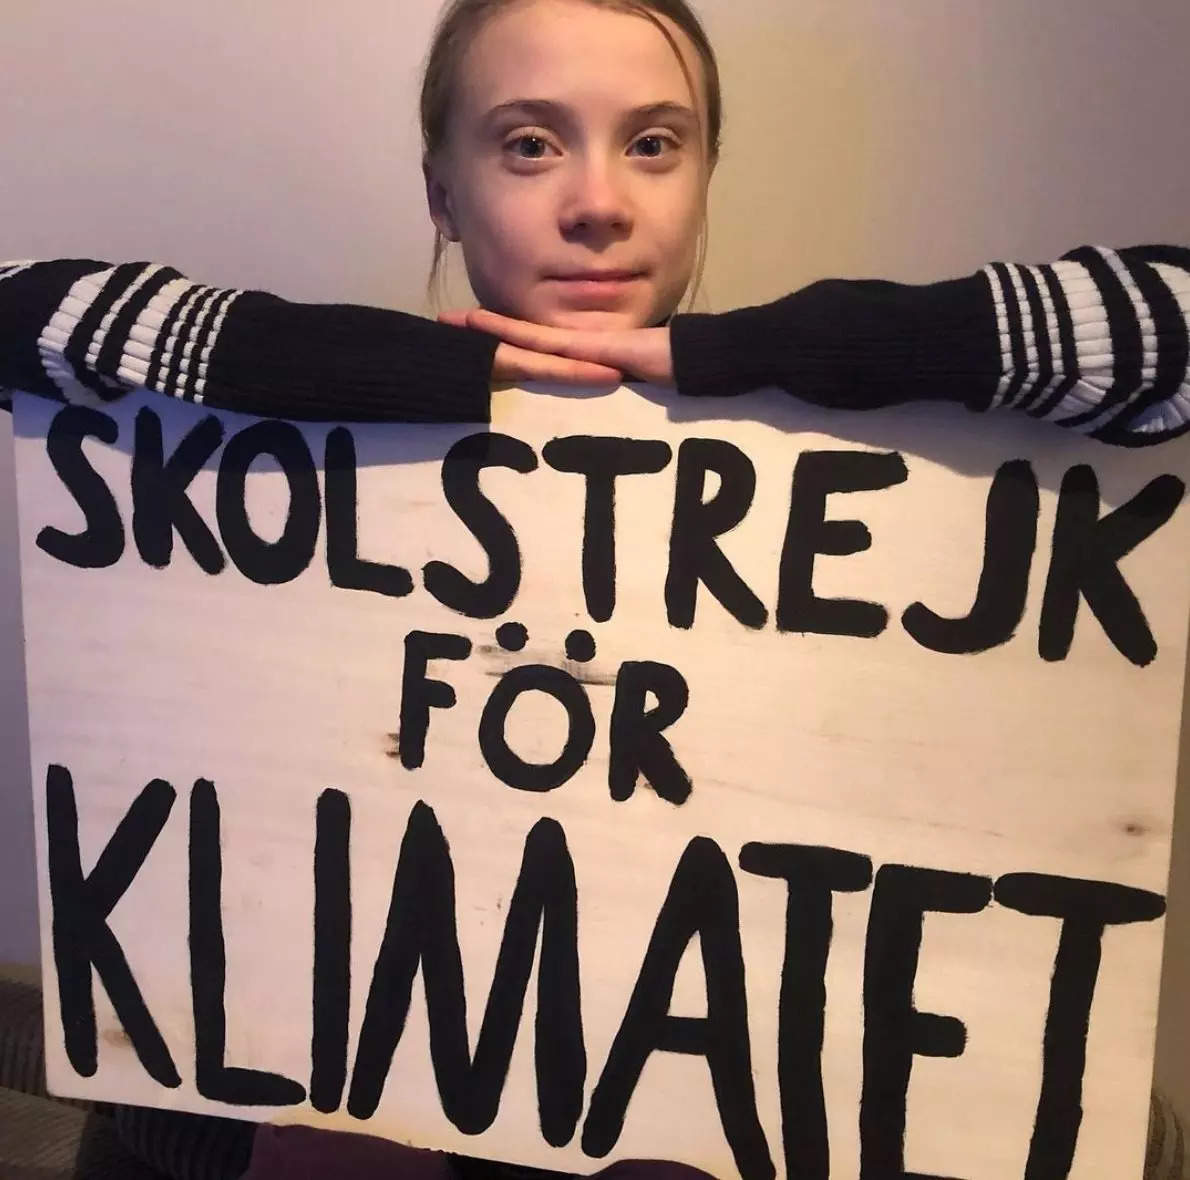 Greta Thunberg pictured with her climate campaign placard Image courtesy GreatThunbergInstagram